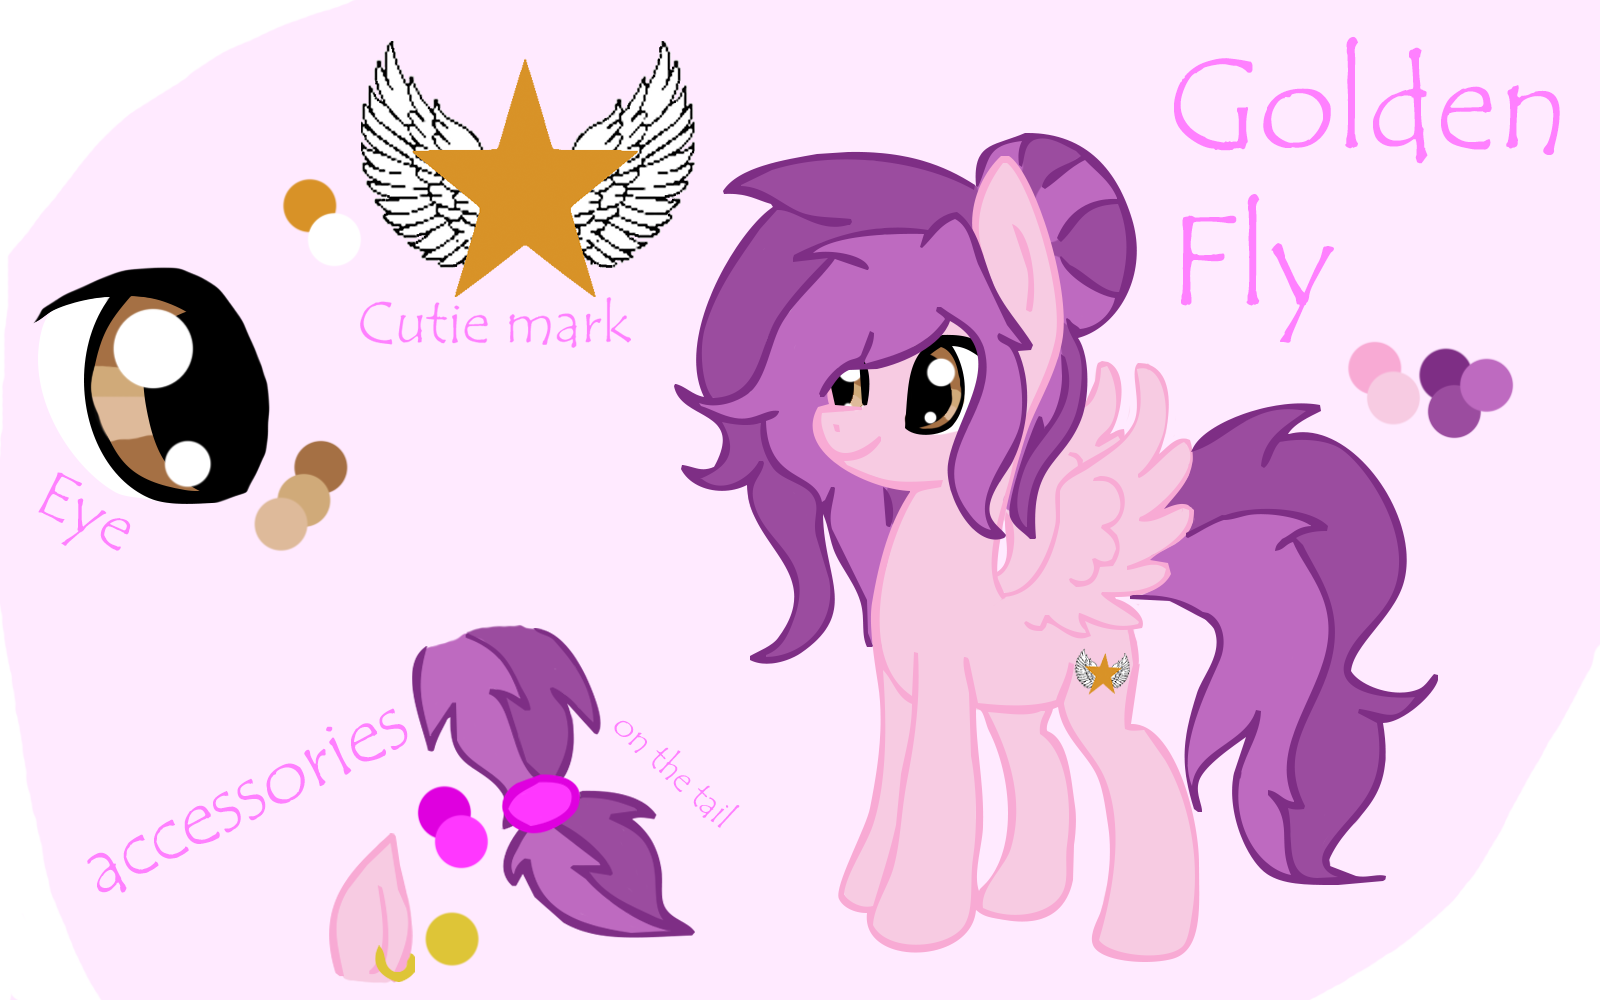 golden_fly_reference_by_golden_fly-d5ppebx.png